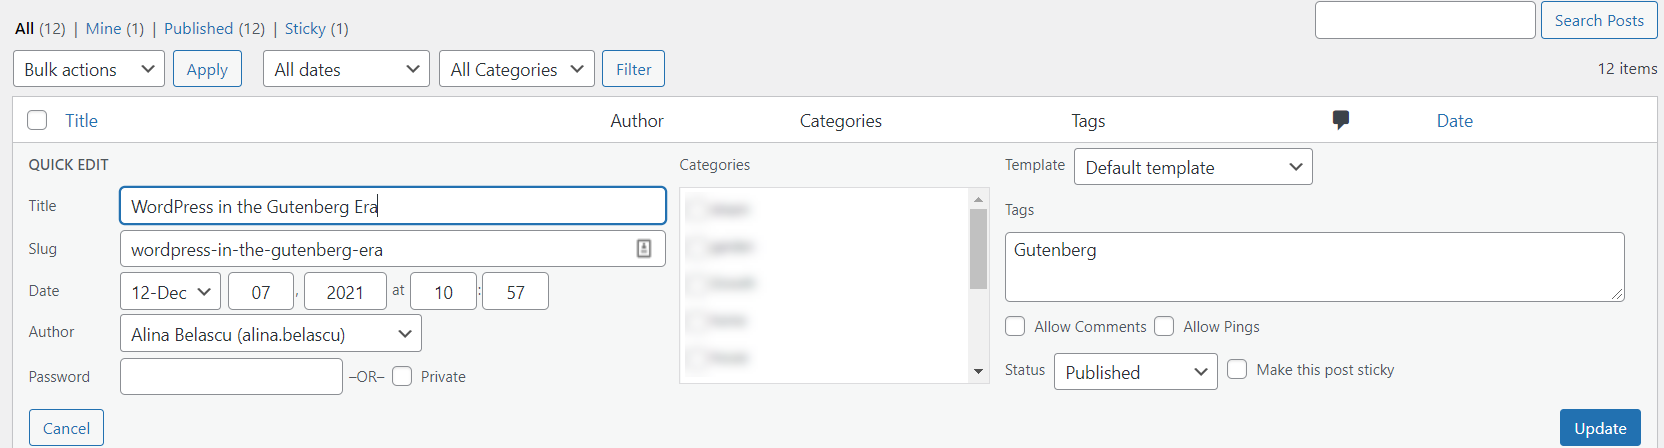 Quick edits for WordPress posts and their tags and categories